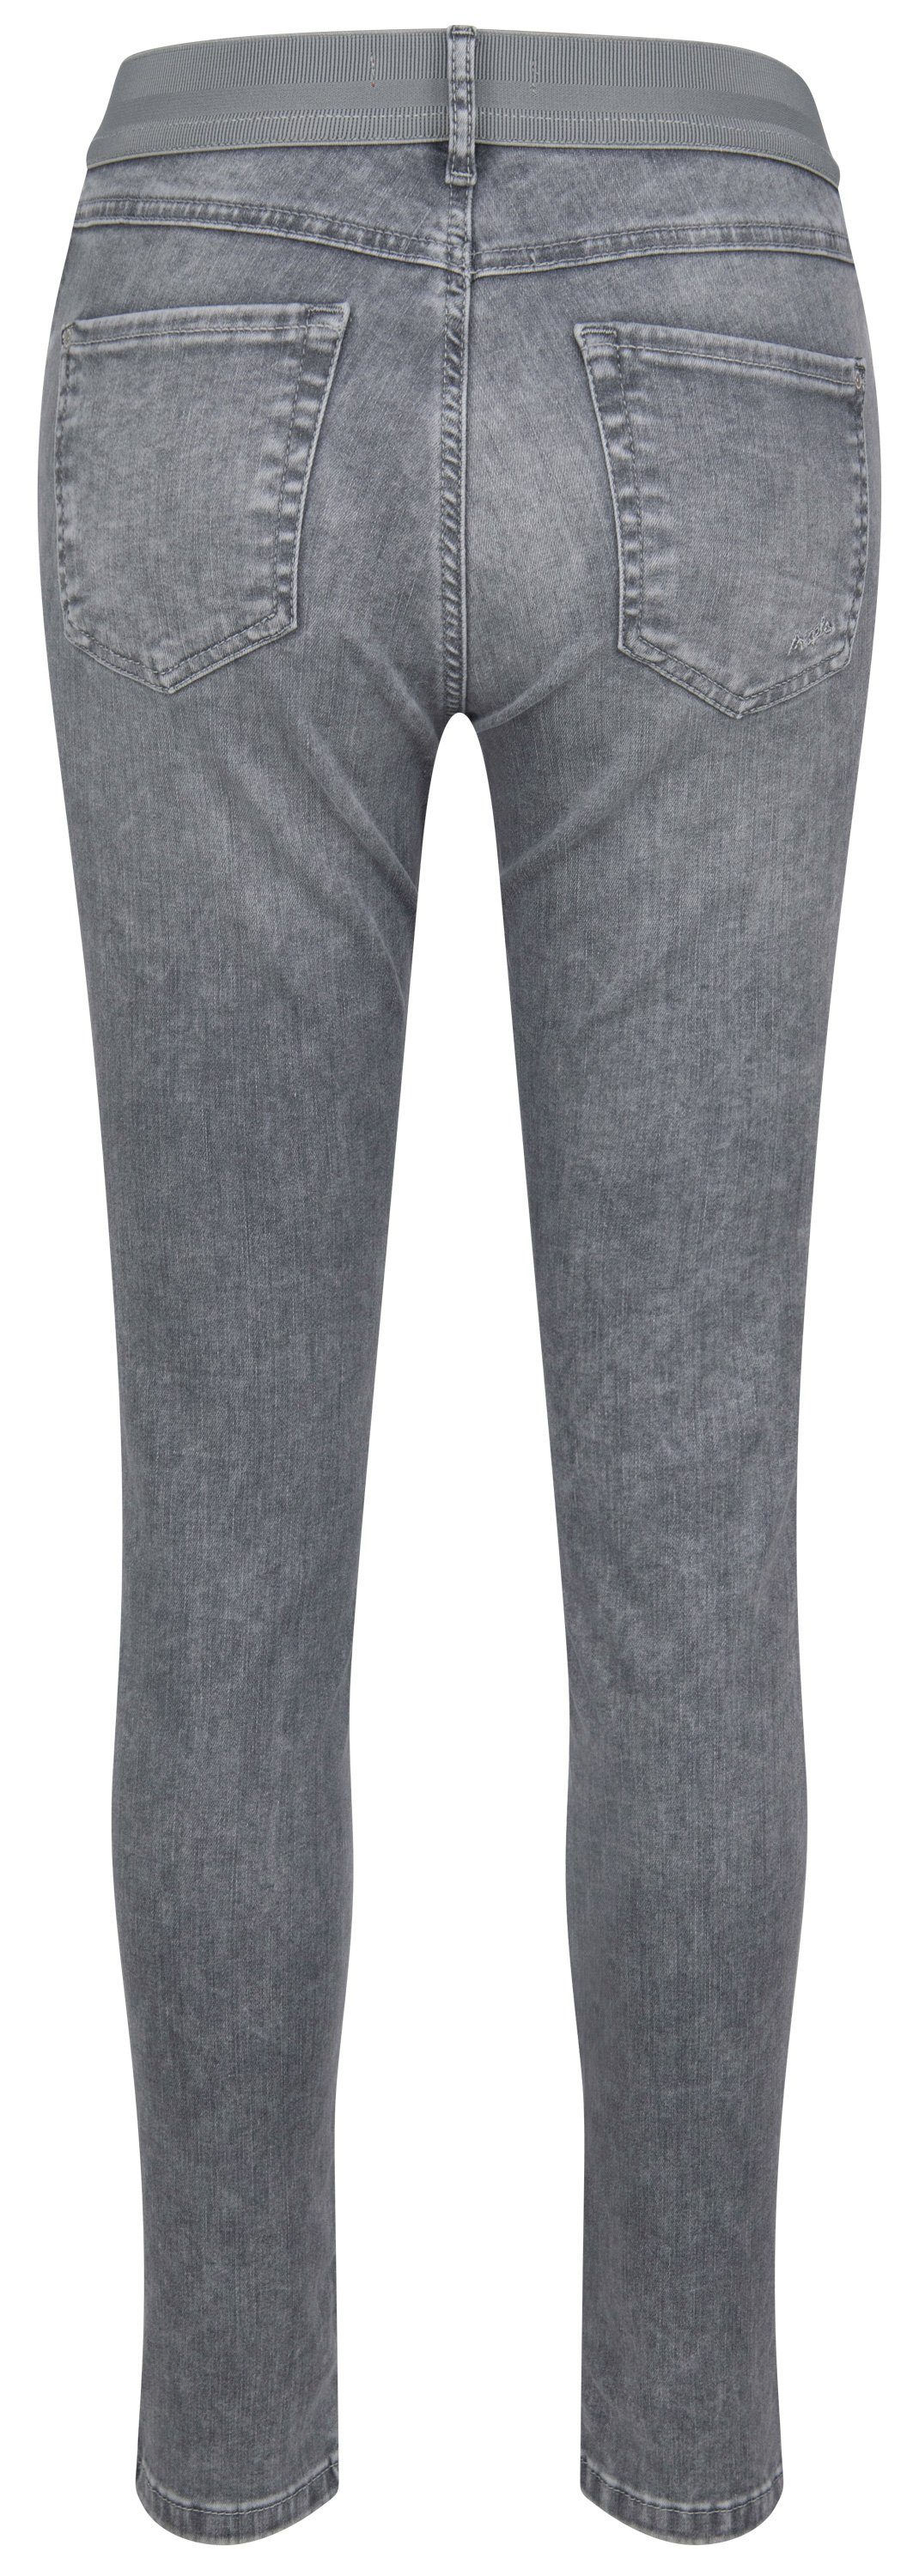 SIZE ANGELS Stretch-Jeans used STRETC - JEANS 399 grey ONE 123730.14758 random ANGELS light